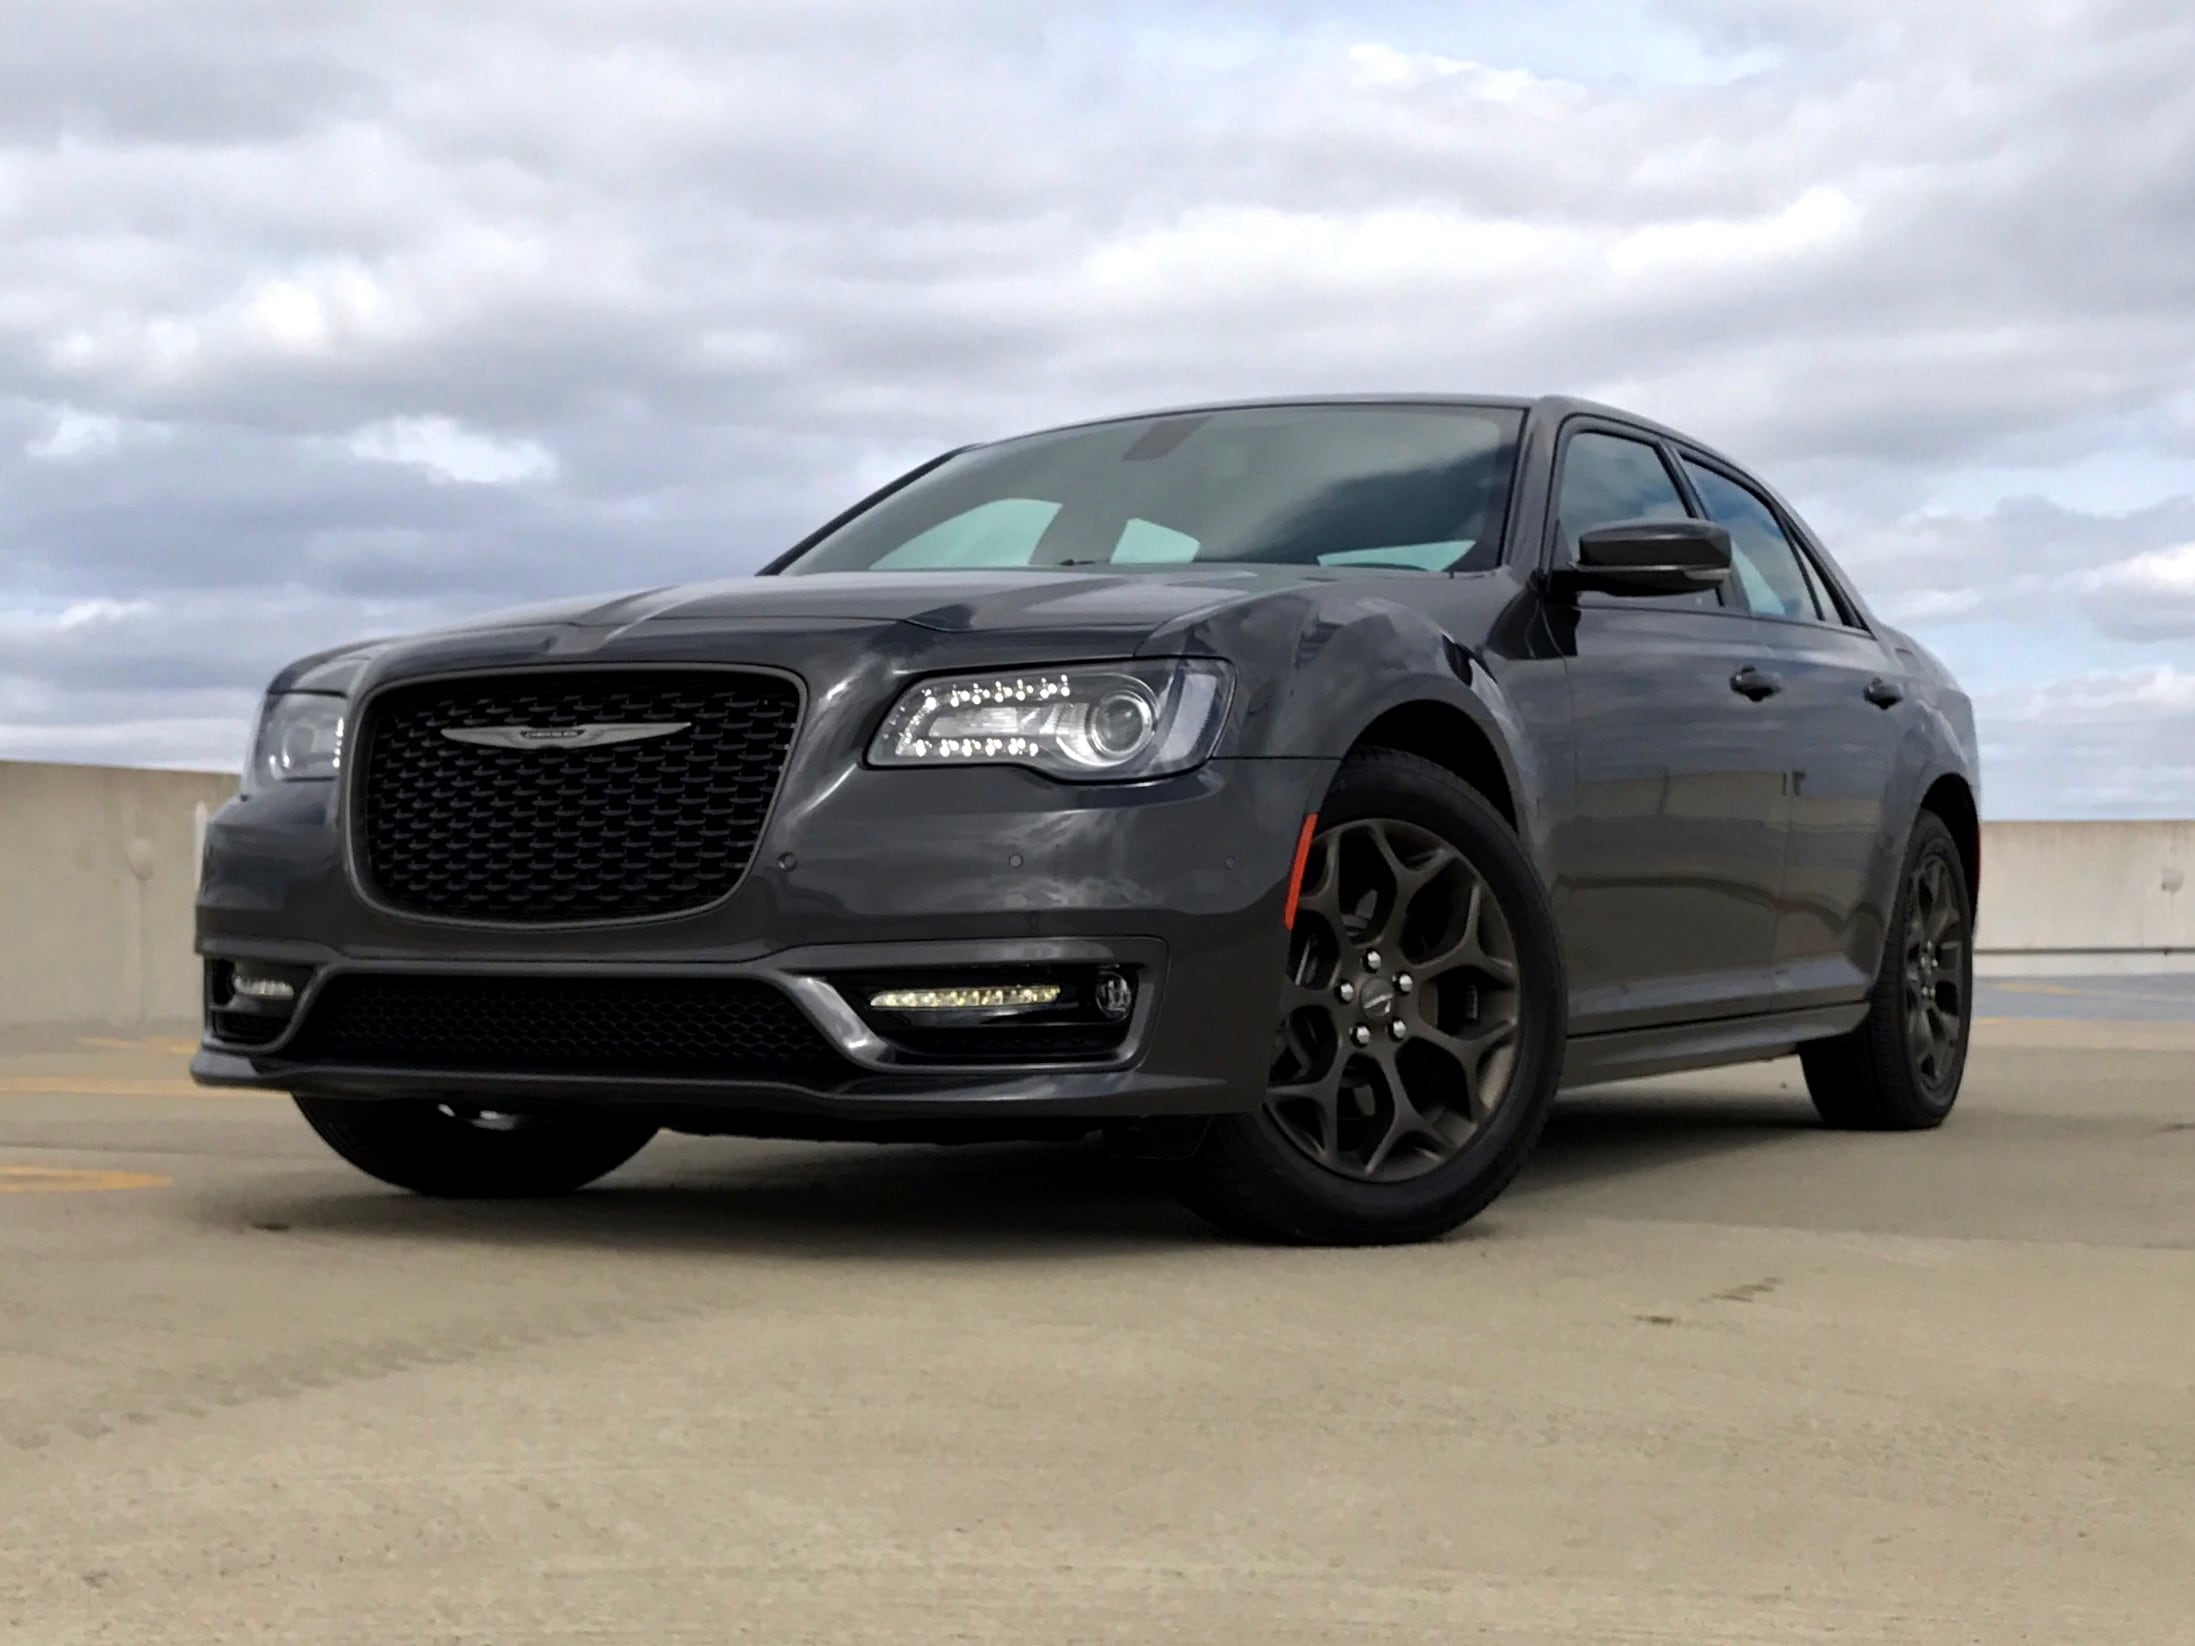 2017 Chrysler 300S Test Drive Review